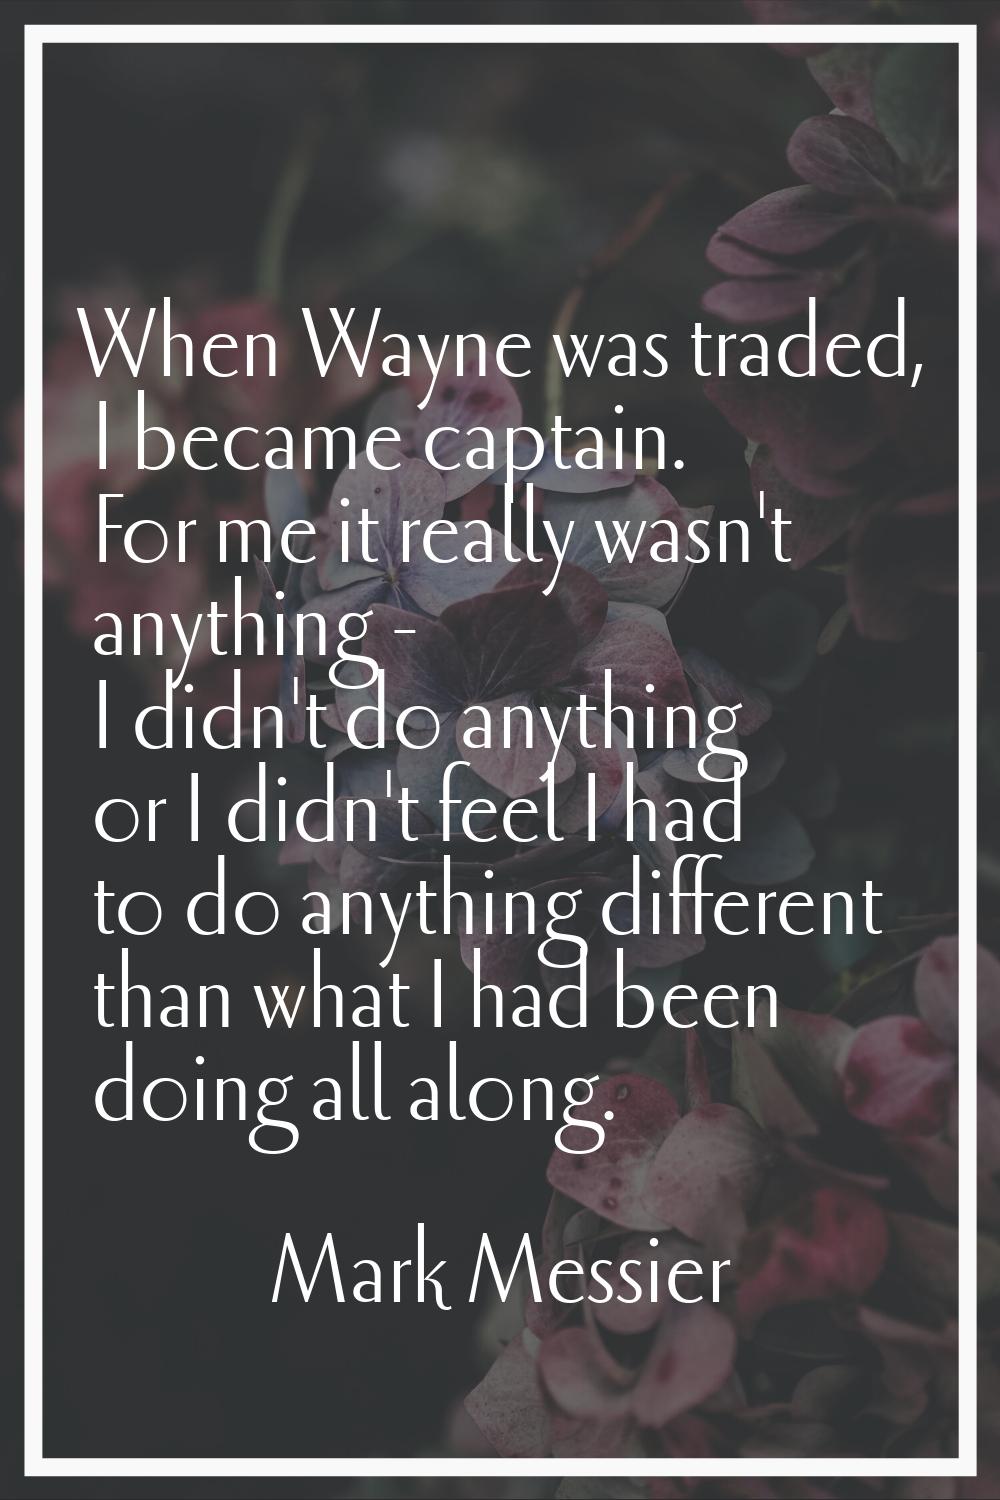 When Wayne was traded, I became captain. For me it really wasn't anything - I didn't do anything or